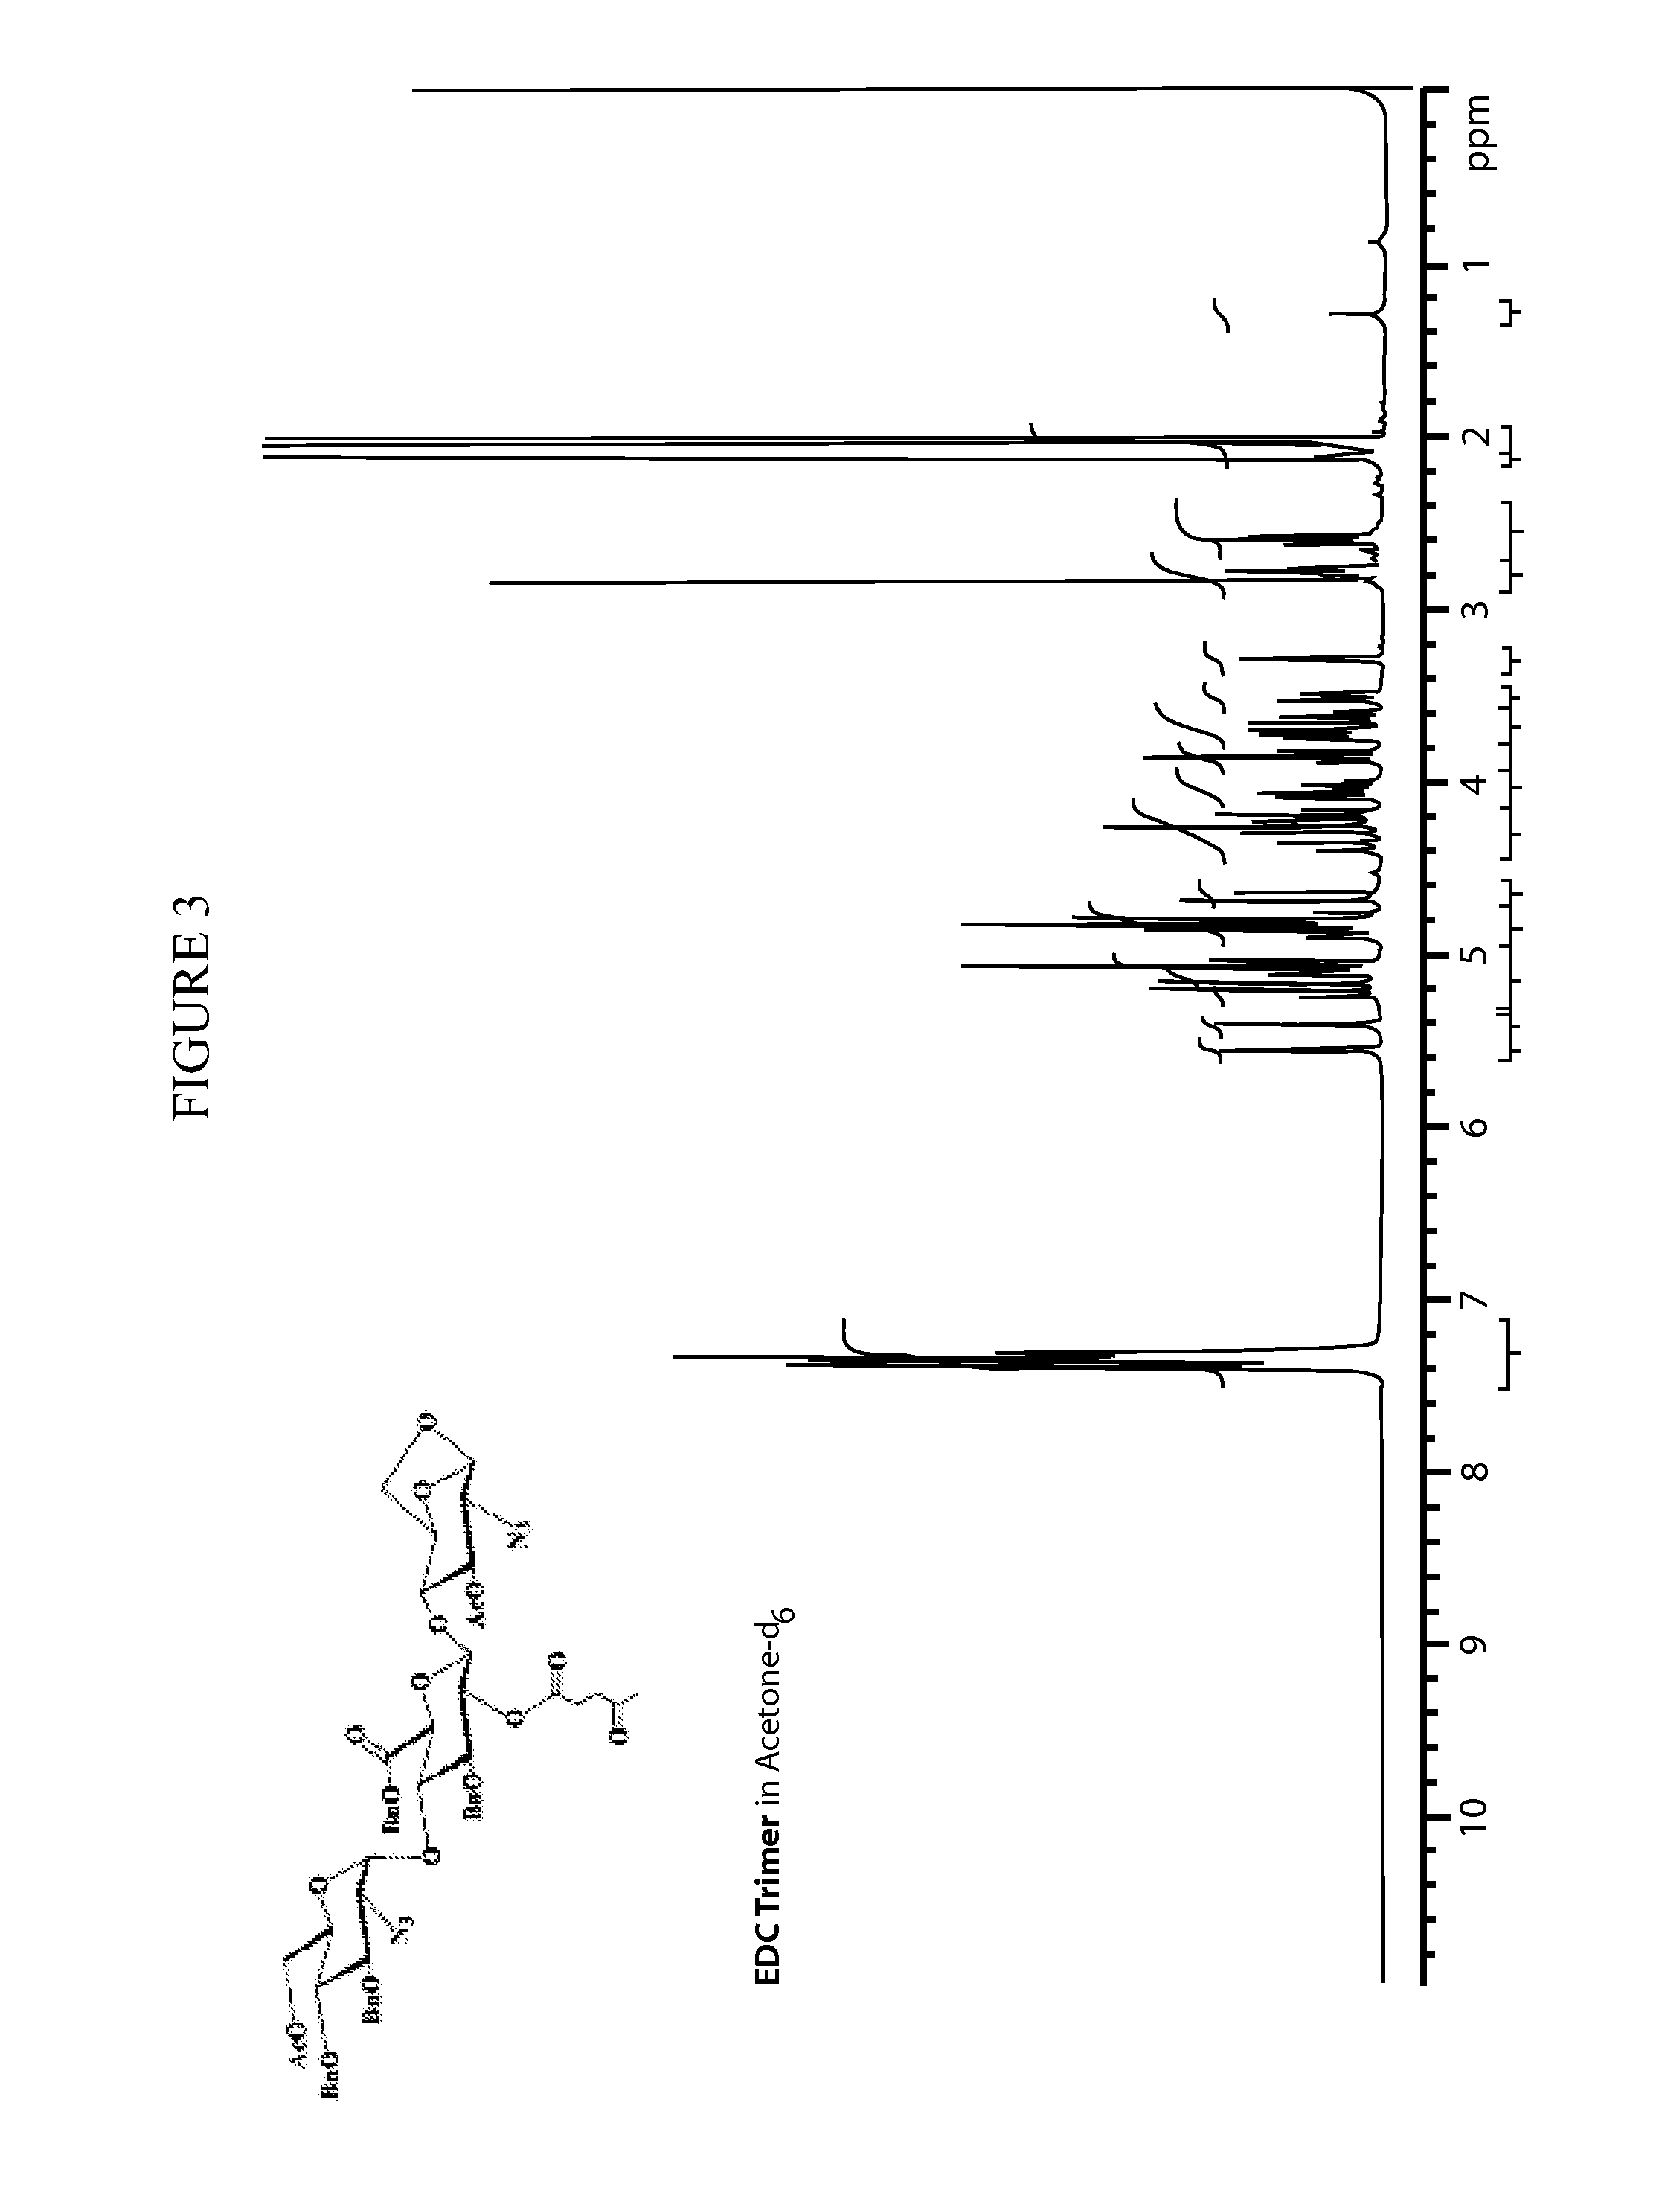 Process for preparing Fondaparinux sodium and intermediates useful in the synthesis thereof